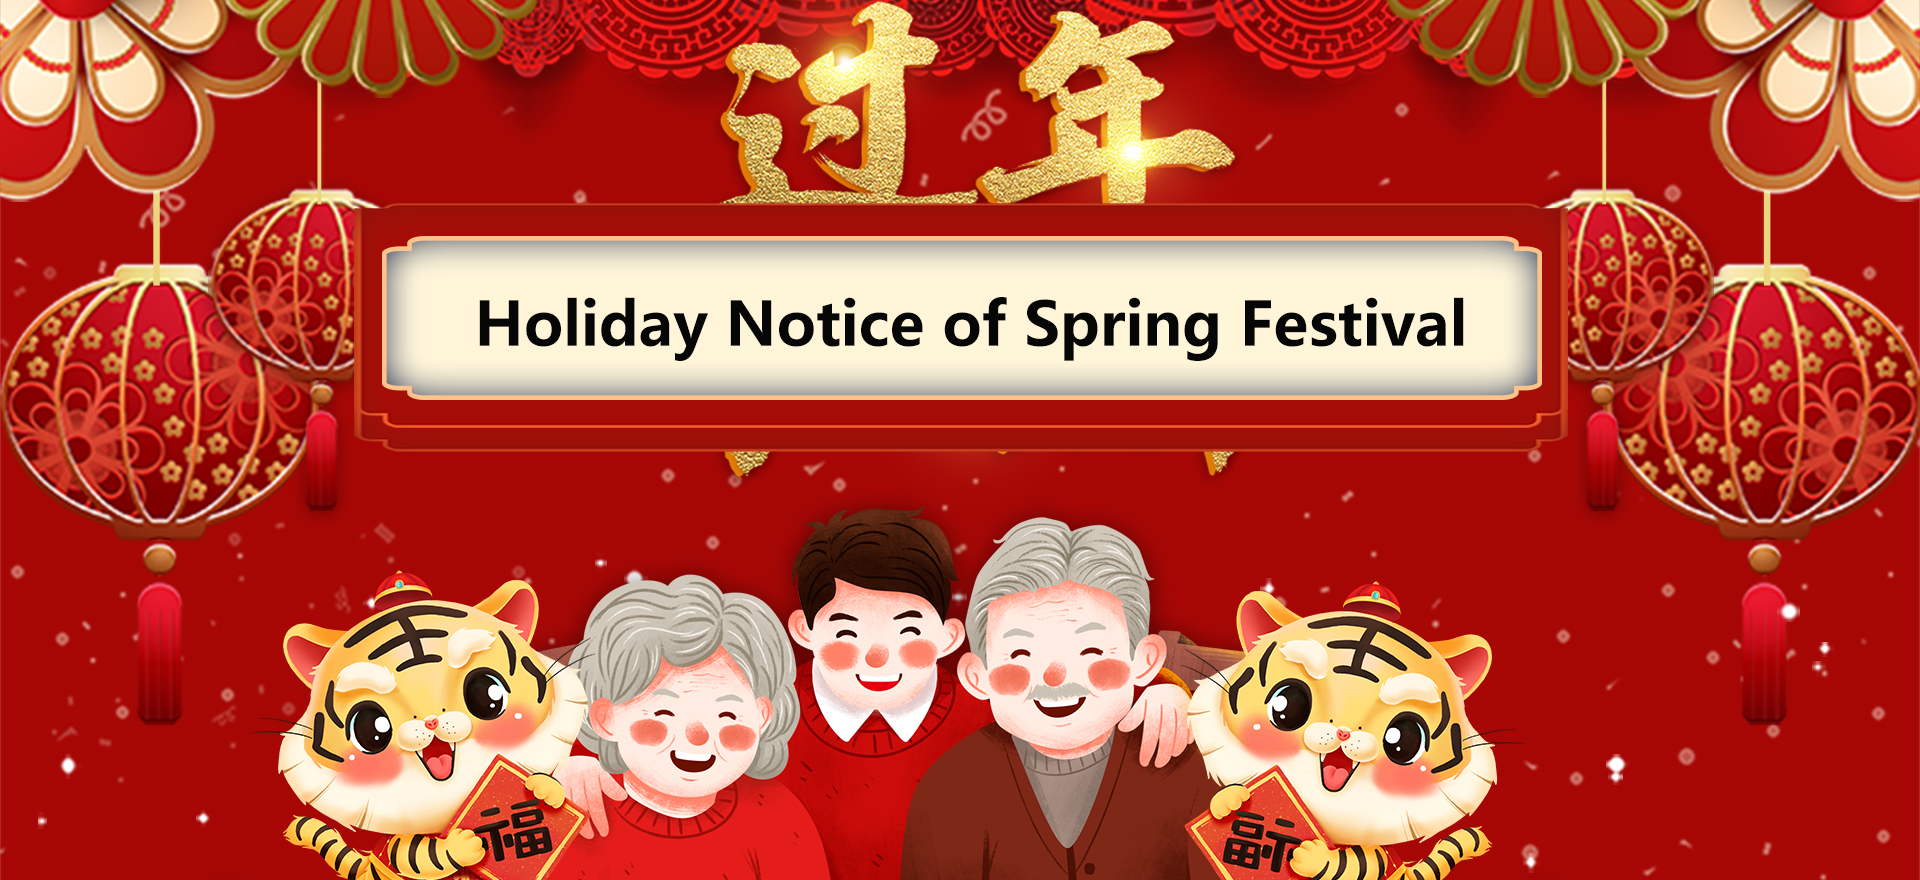  Holiday Notice of Spring Festival